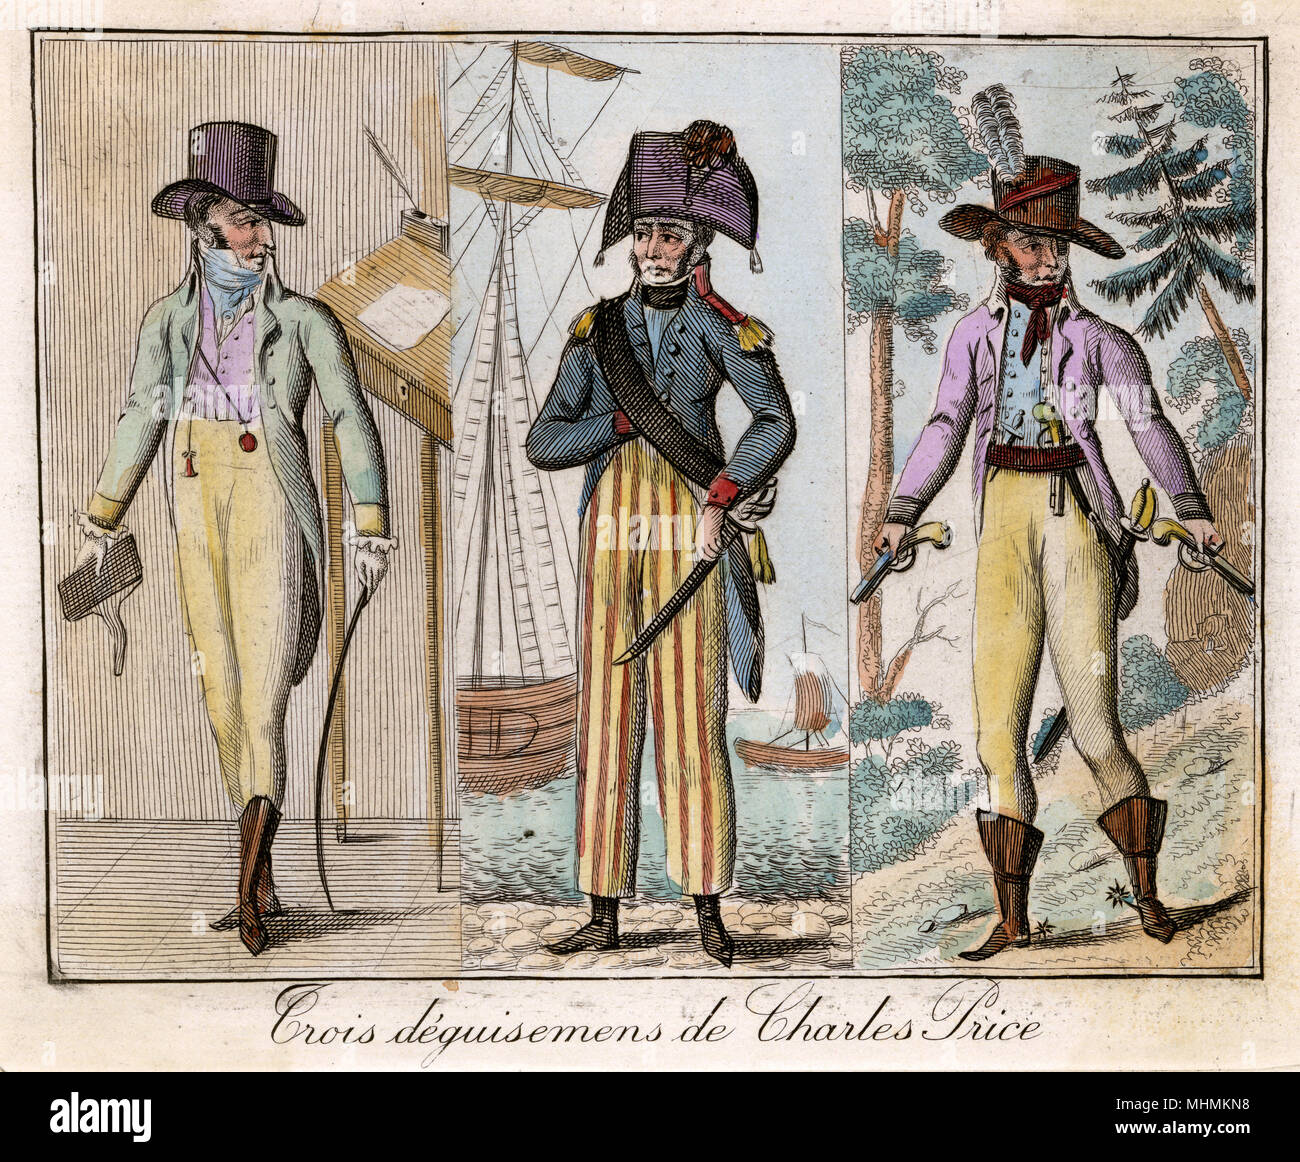 Charles Price in three of his various disguises       Date: Eighteenth century Stock Photo